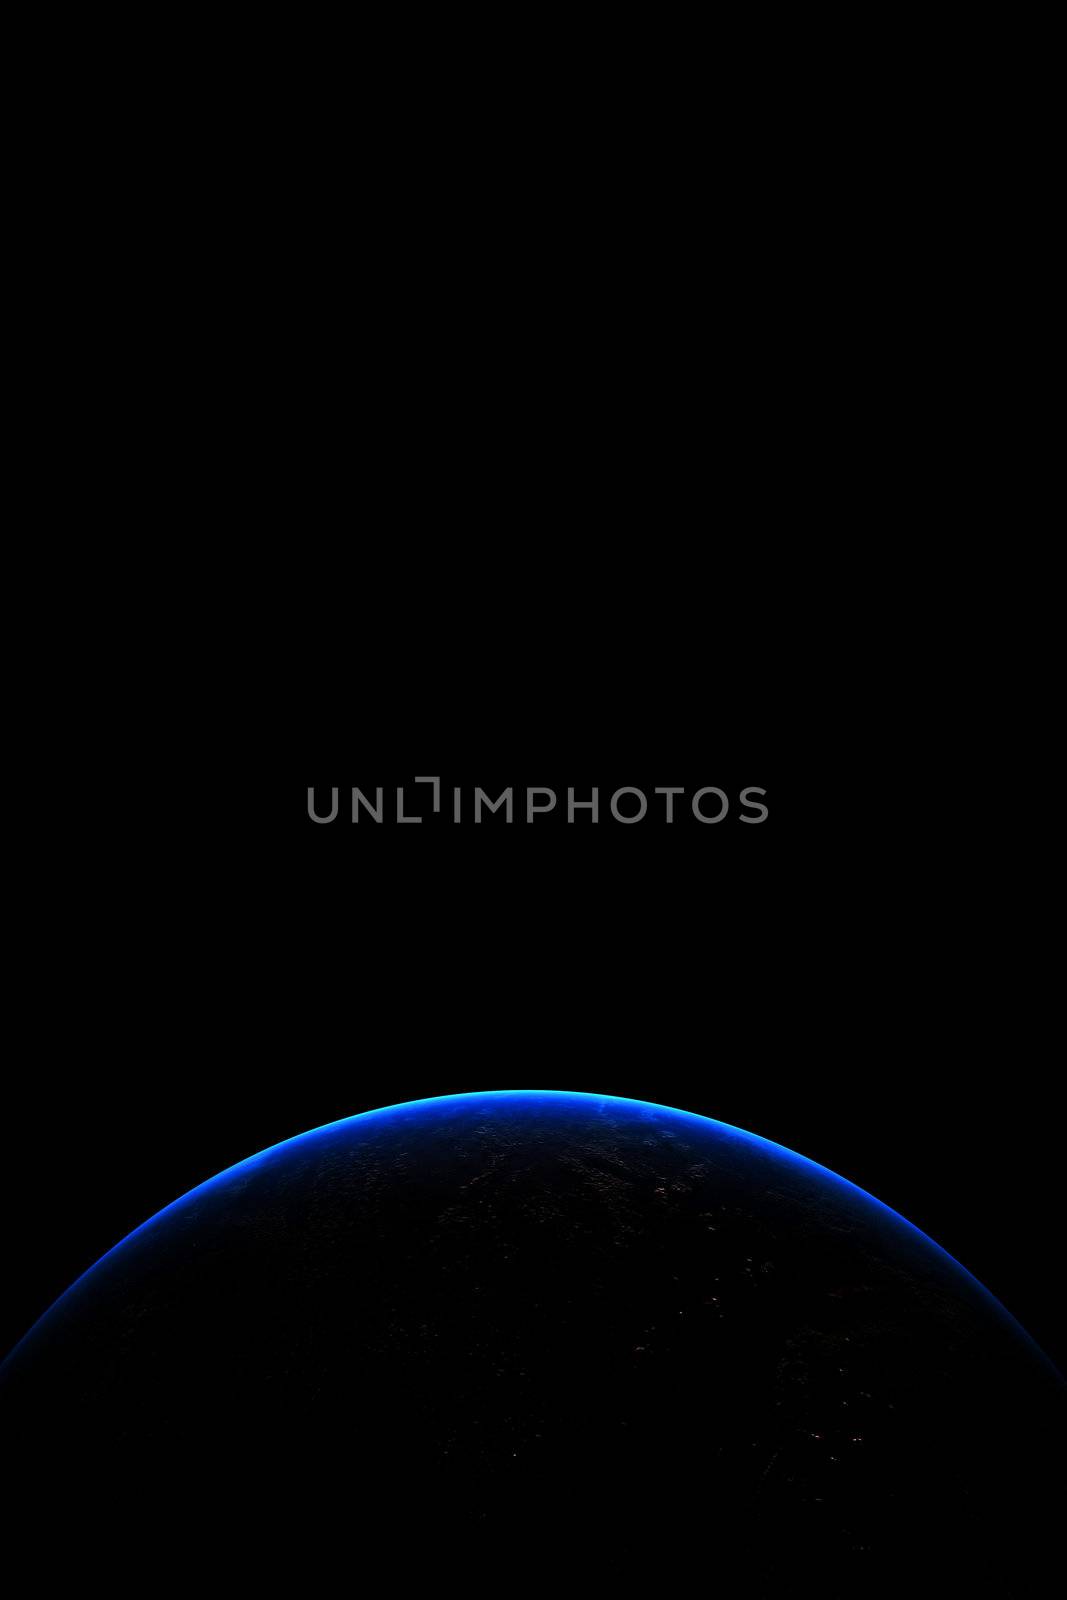 The blue atmosphere of the earth illuminated by the sun